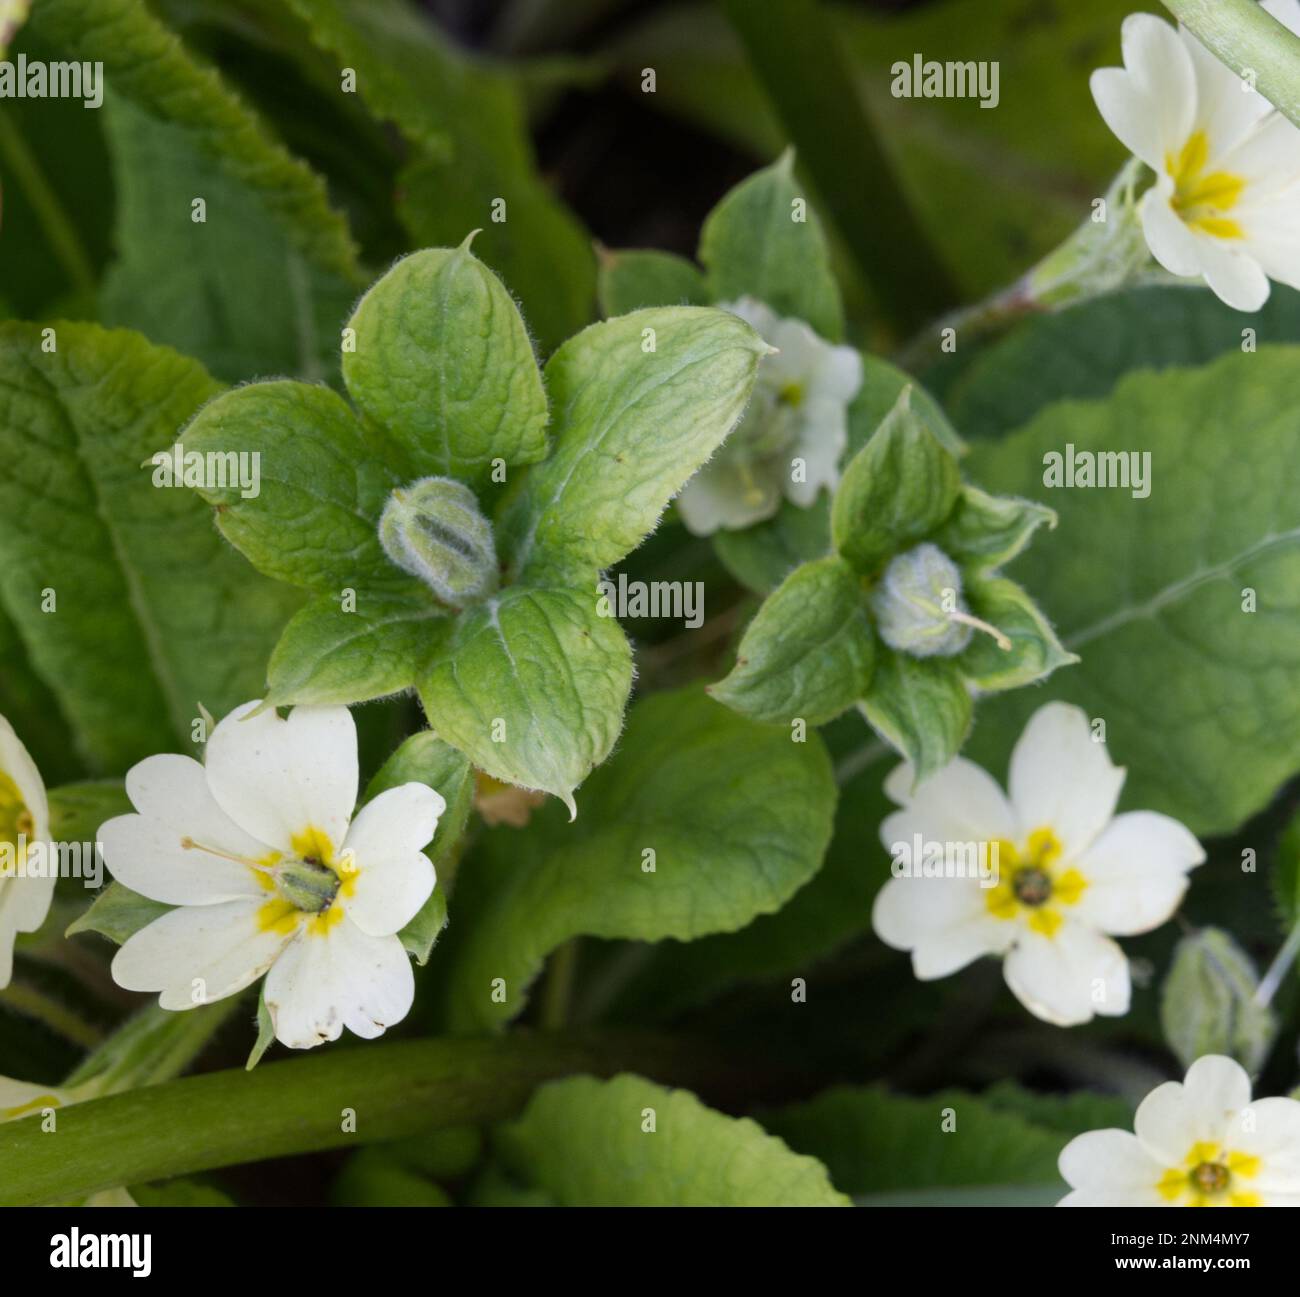 An unusual 'Jack in the green' variant of spring primrose, Primula vulgaris, with a green ruff to the flowers. UK meadow garden April Stock Photo